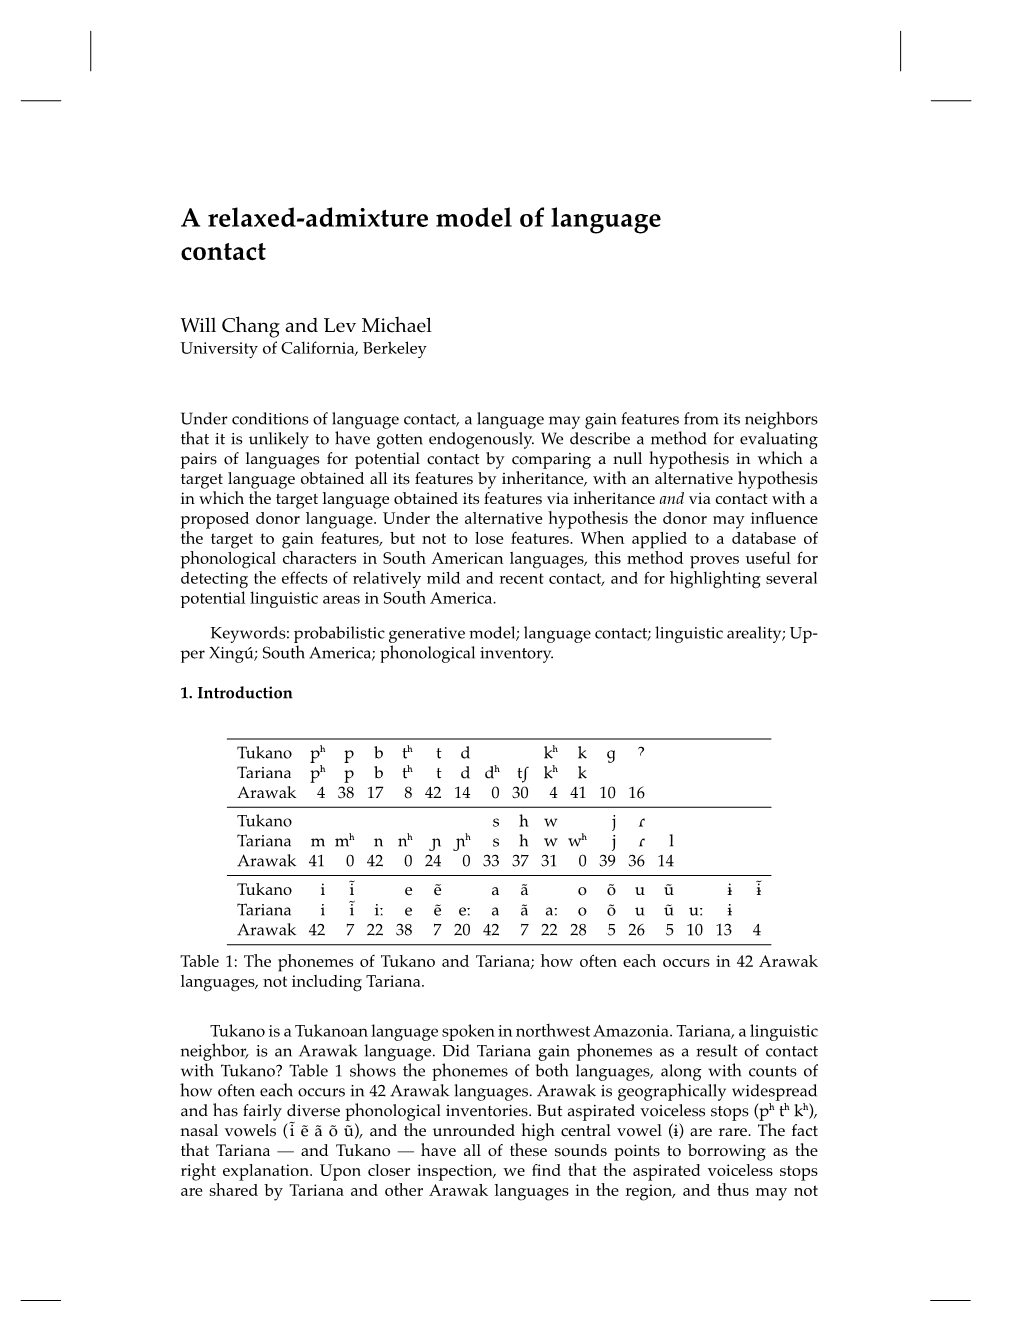 A Relaxed-Admixture Model of Language Contact